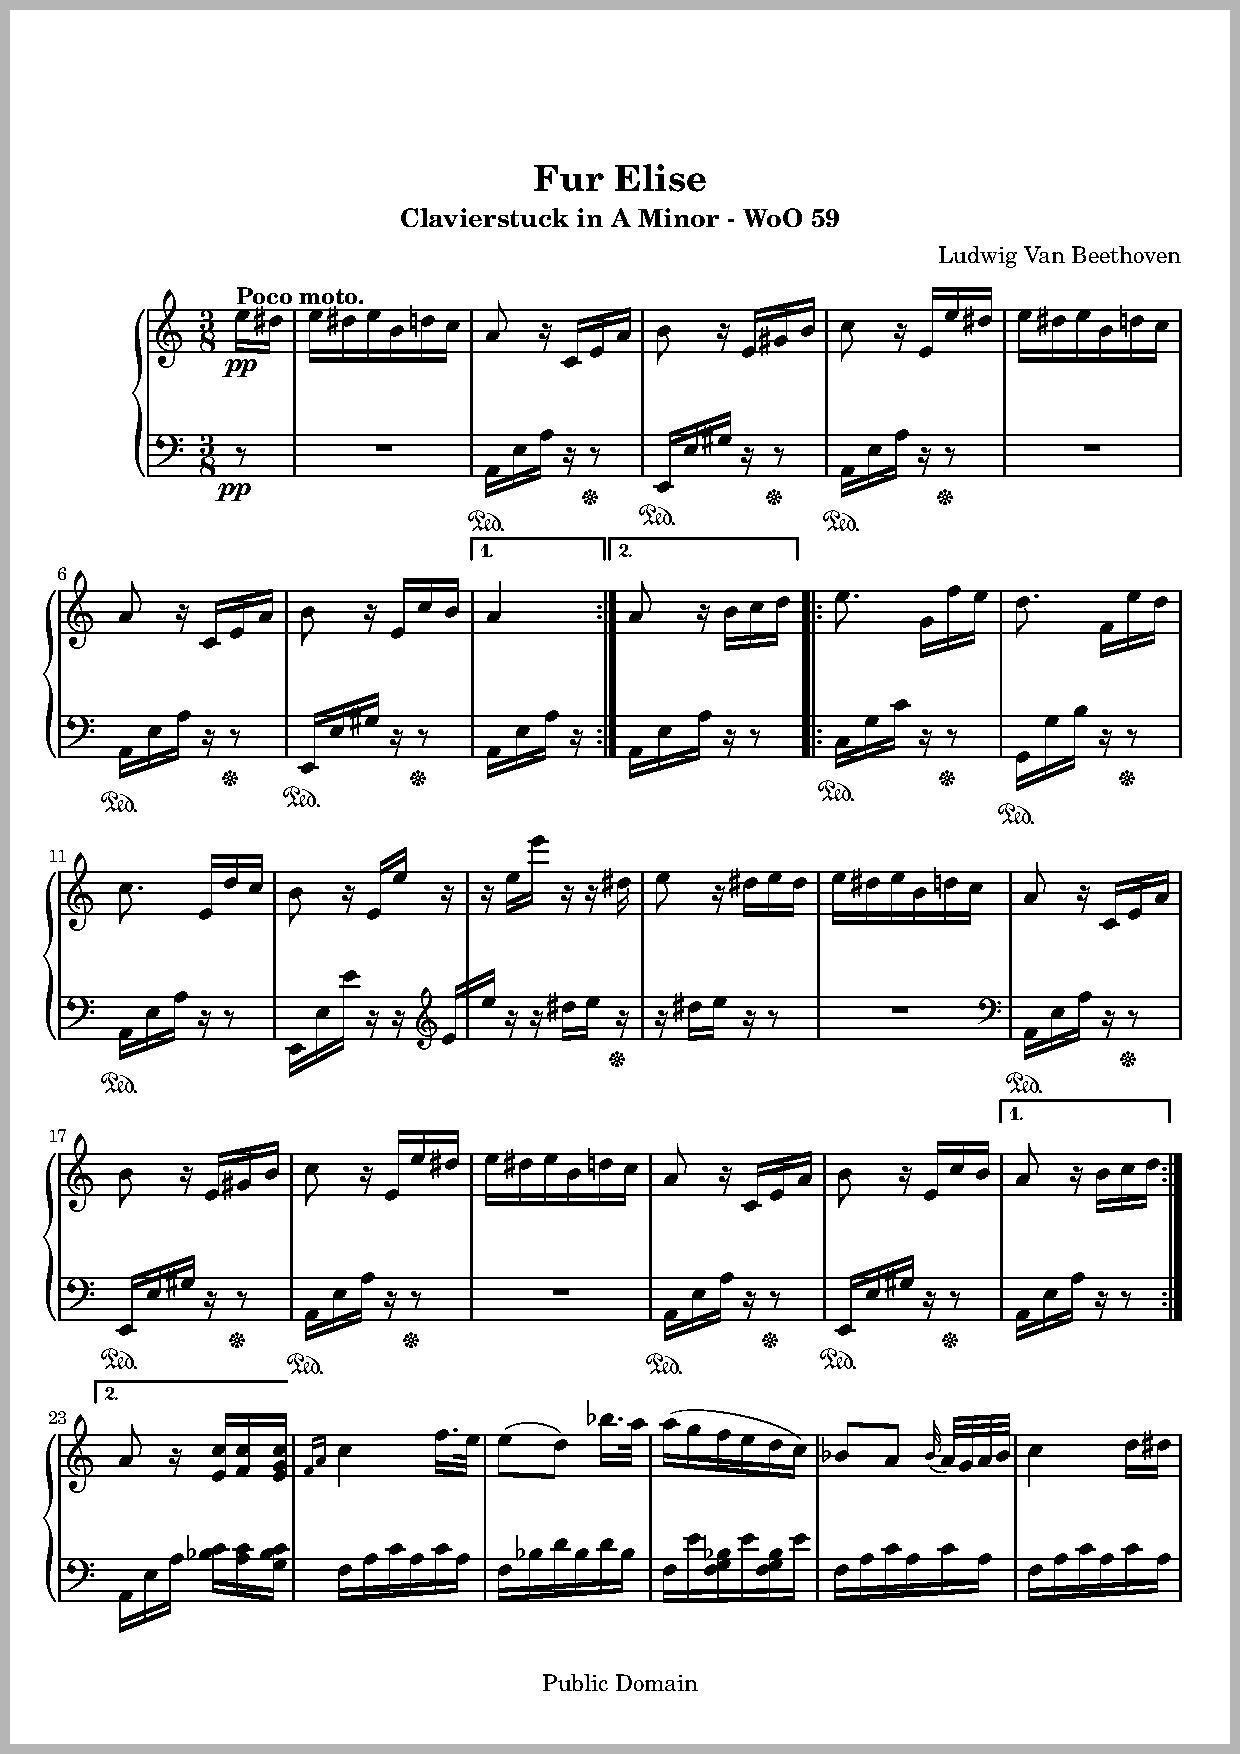 Ring Of Fire Chords Ring Of Fire Chords 459385 File Imslp Fur Elise Beethoven Woo59 Pdf